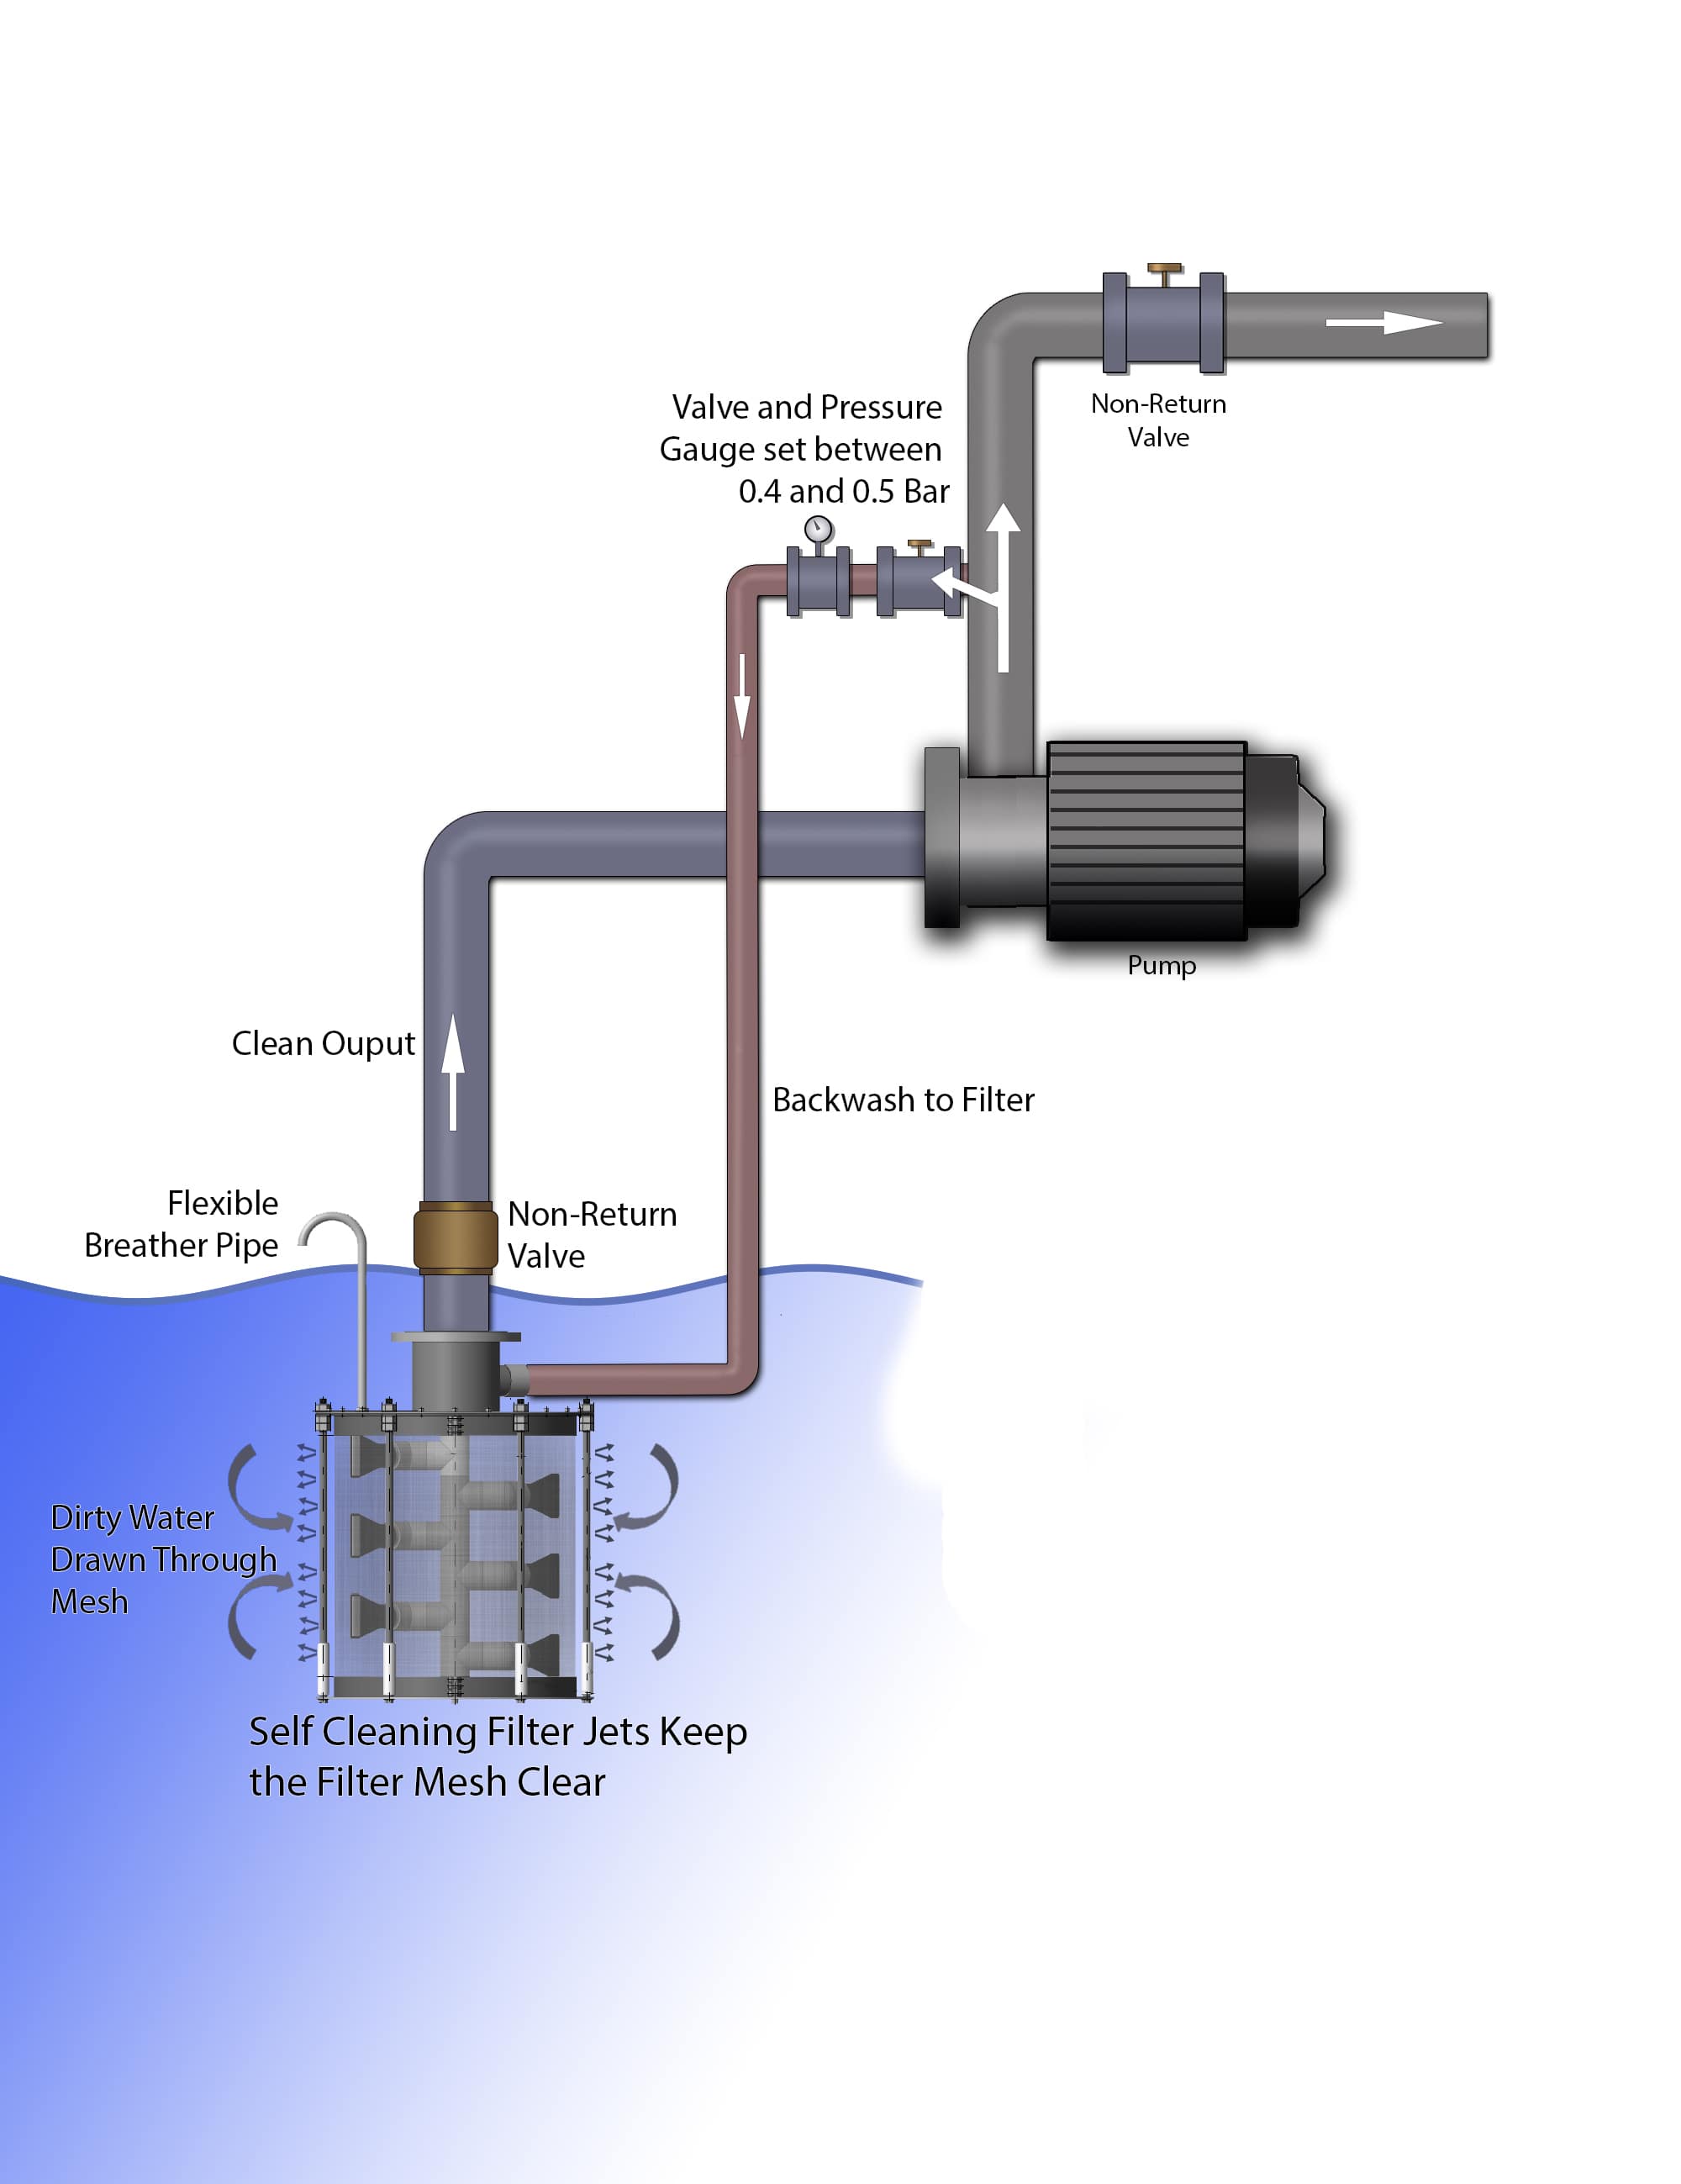 Pipe Diagram for Standard Self-cleaning Filter Set-up